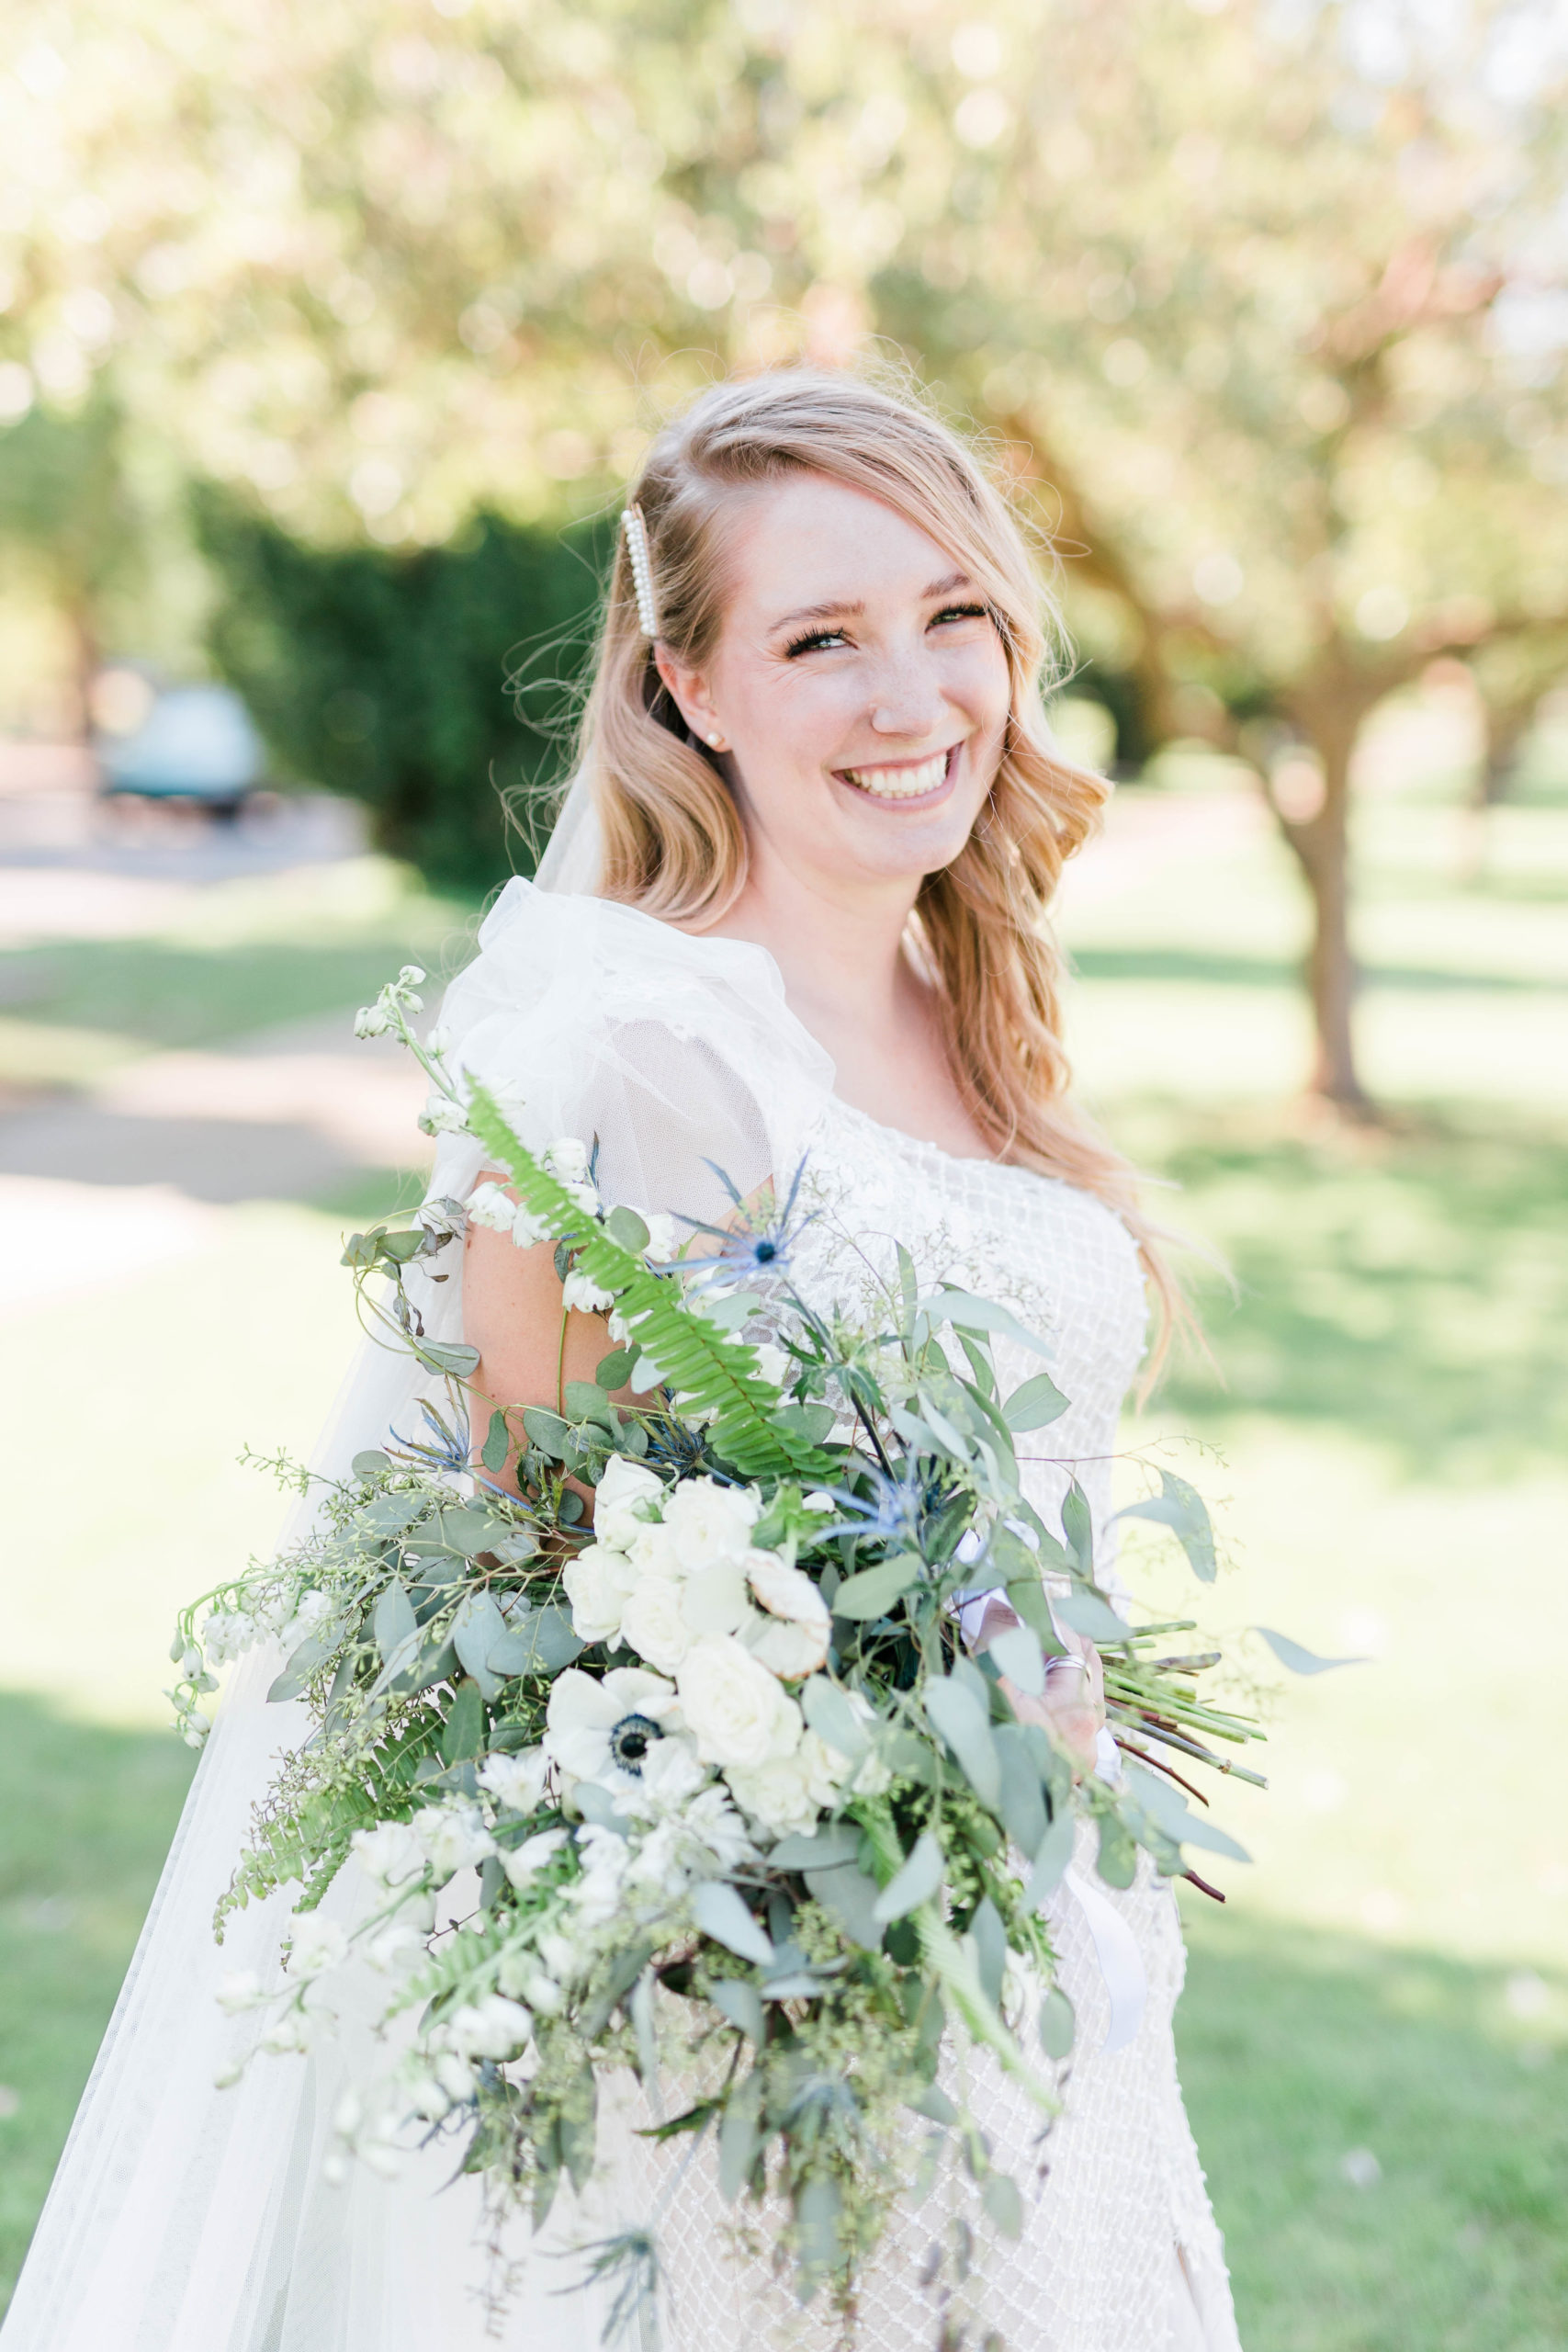 Boise outdoor wedding with bride holding her white and blue bouquet and smiling at the camera